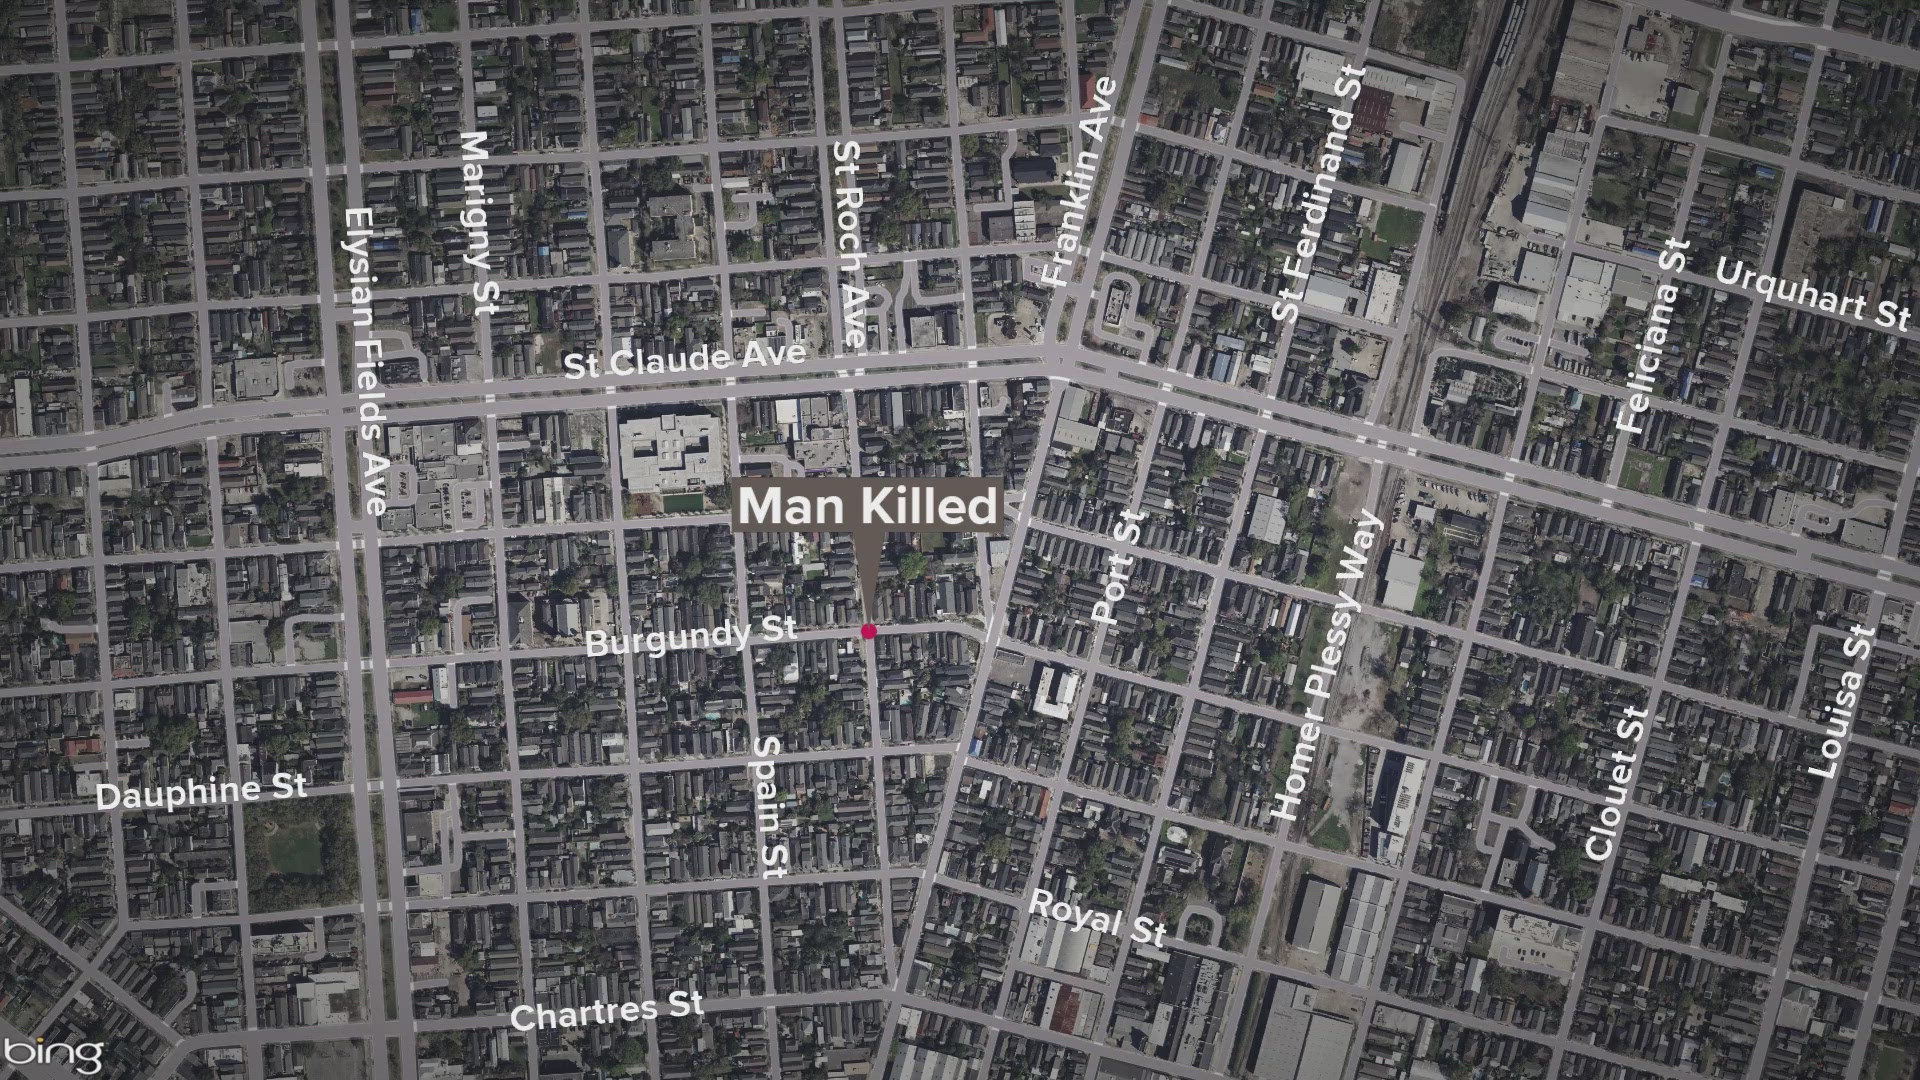 NOPD investigate after a man was found shot dead in the Marigny neighborhood.